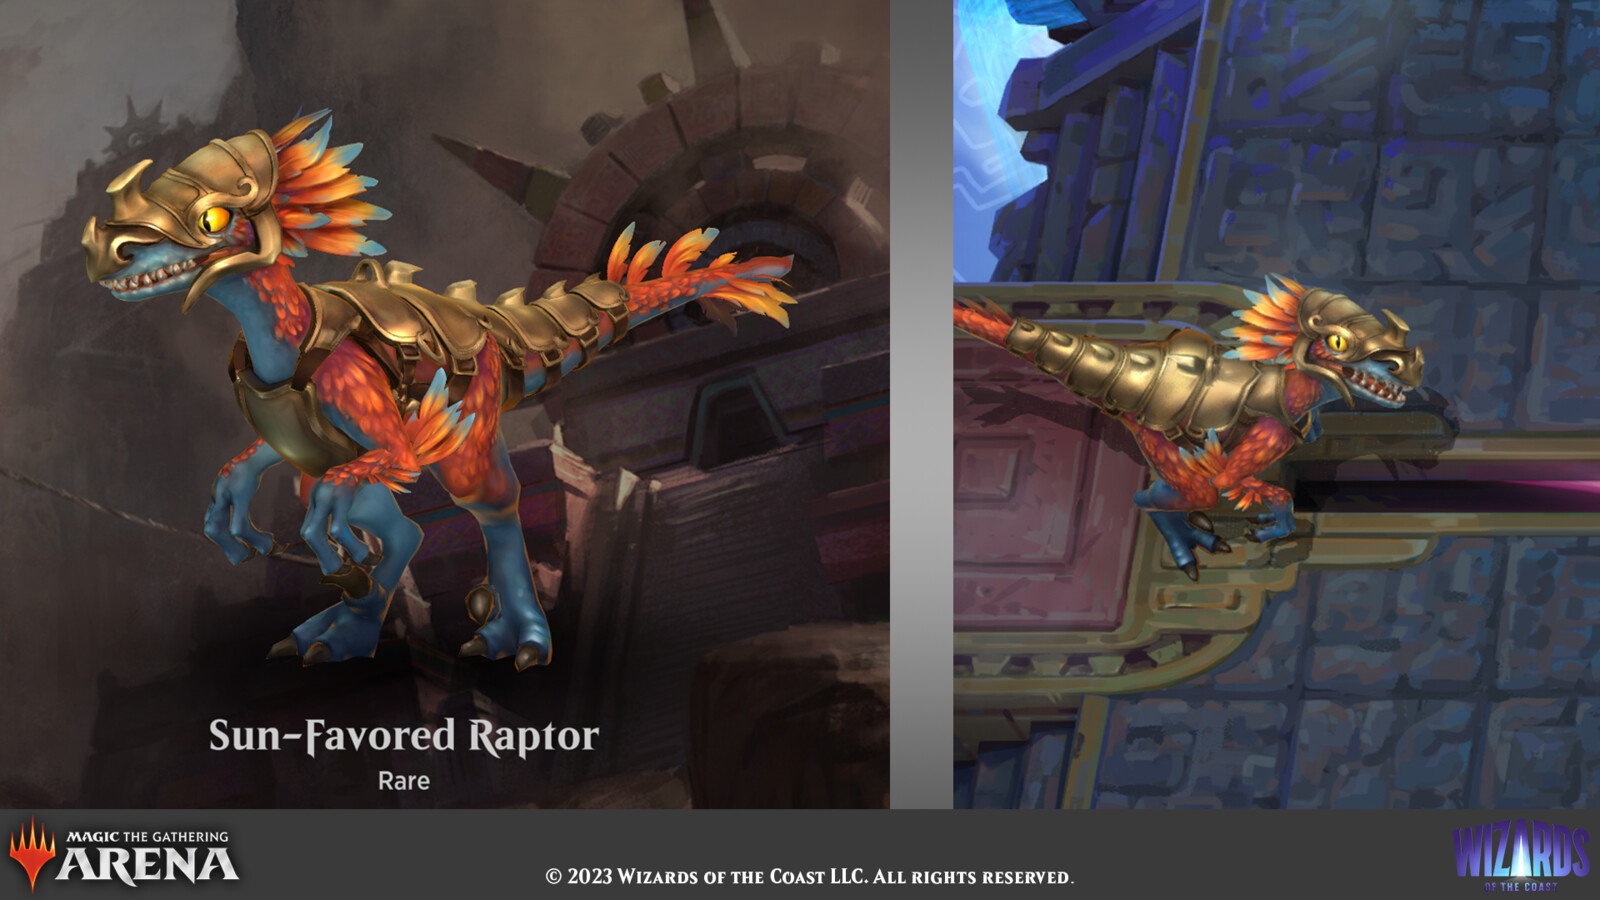 Select companion and game views for the Sun-Favored Raptor